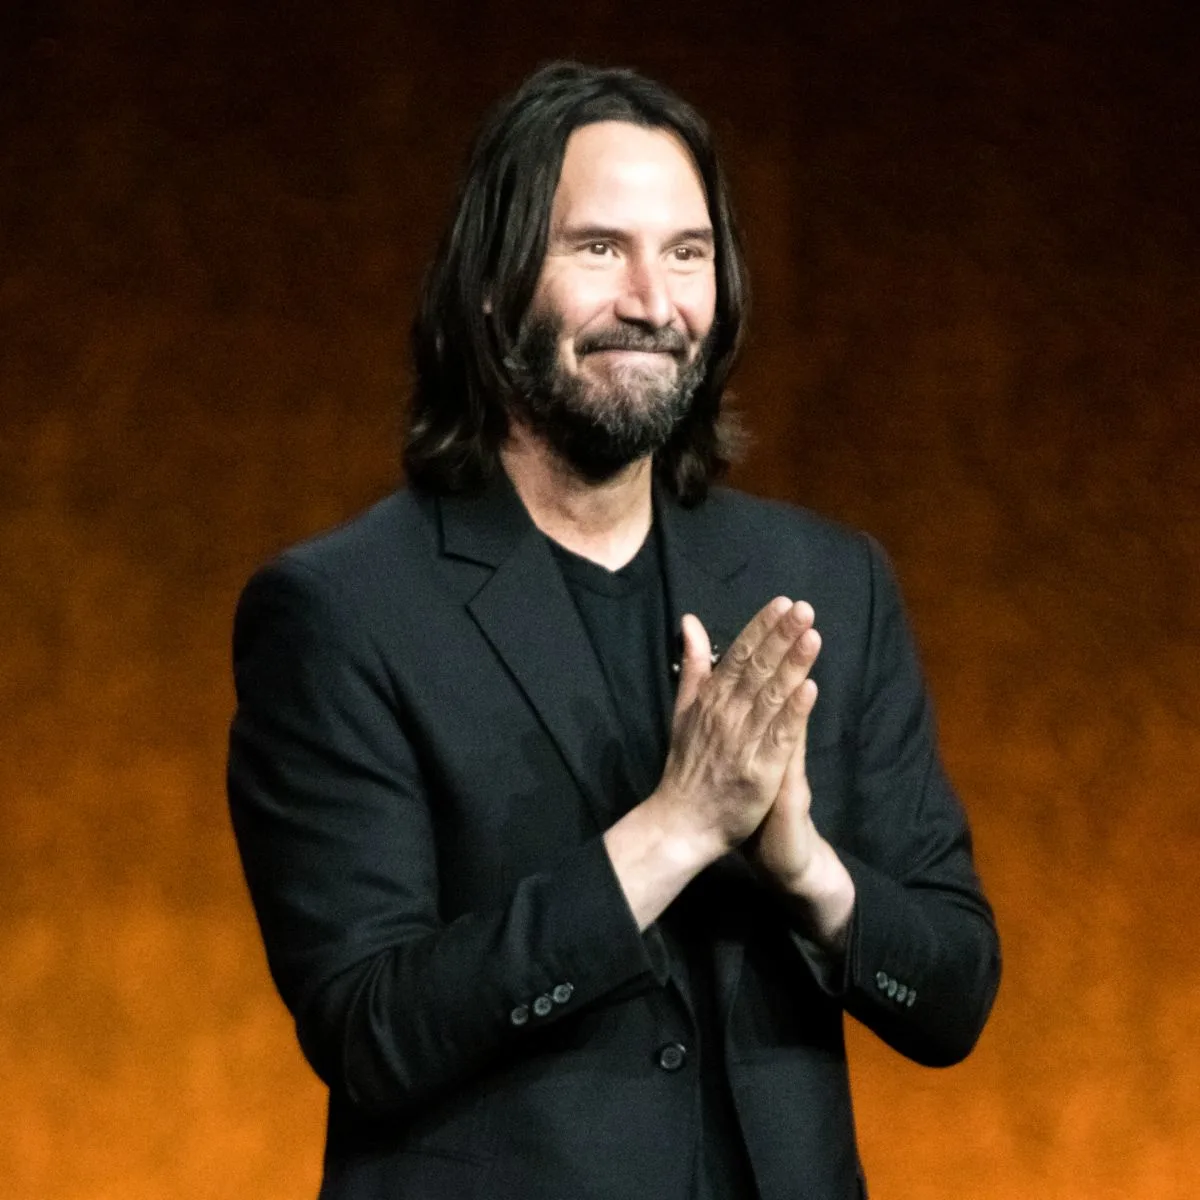 Does Keanu Reeves have a son named Dustin